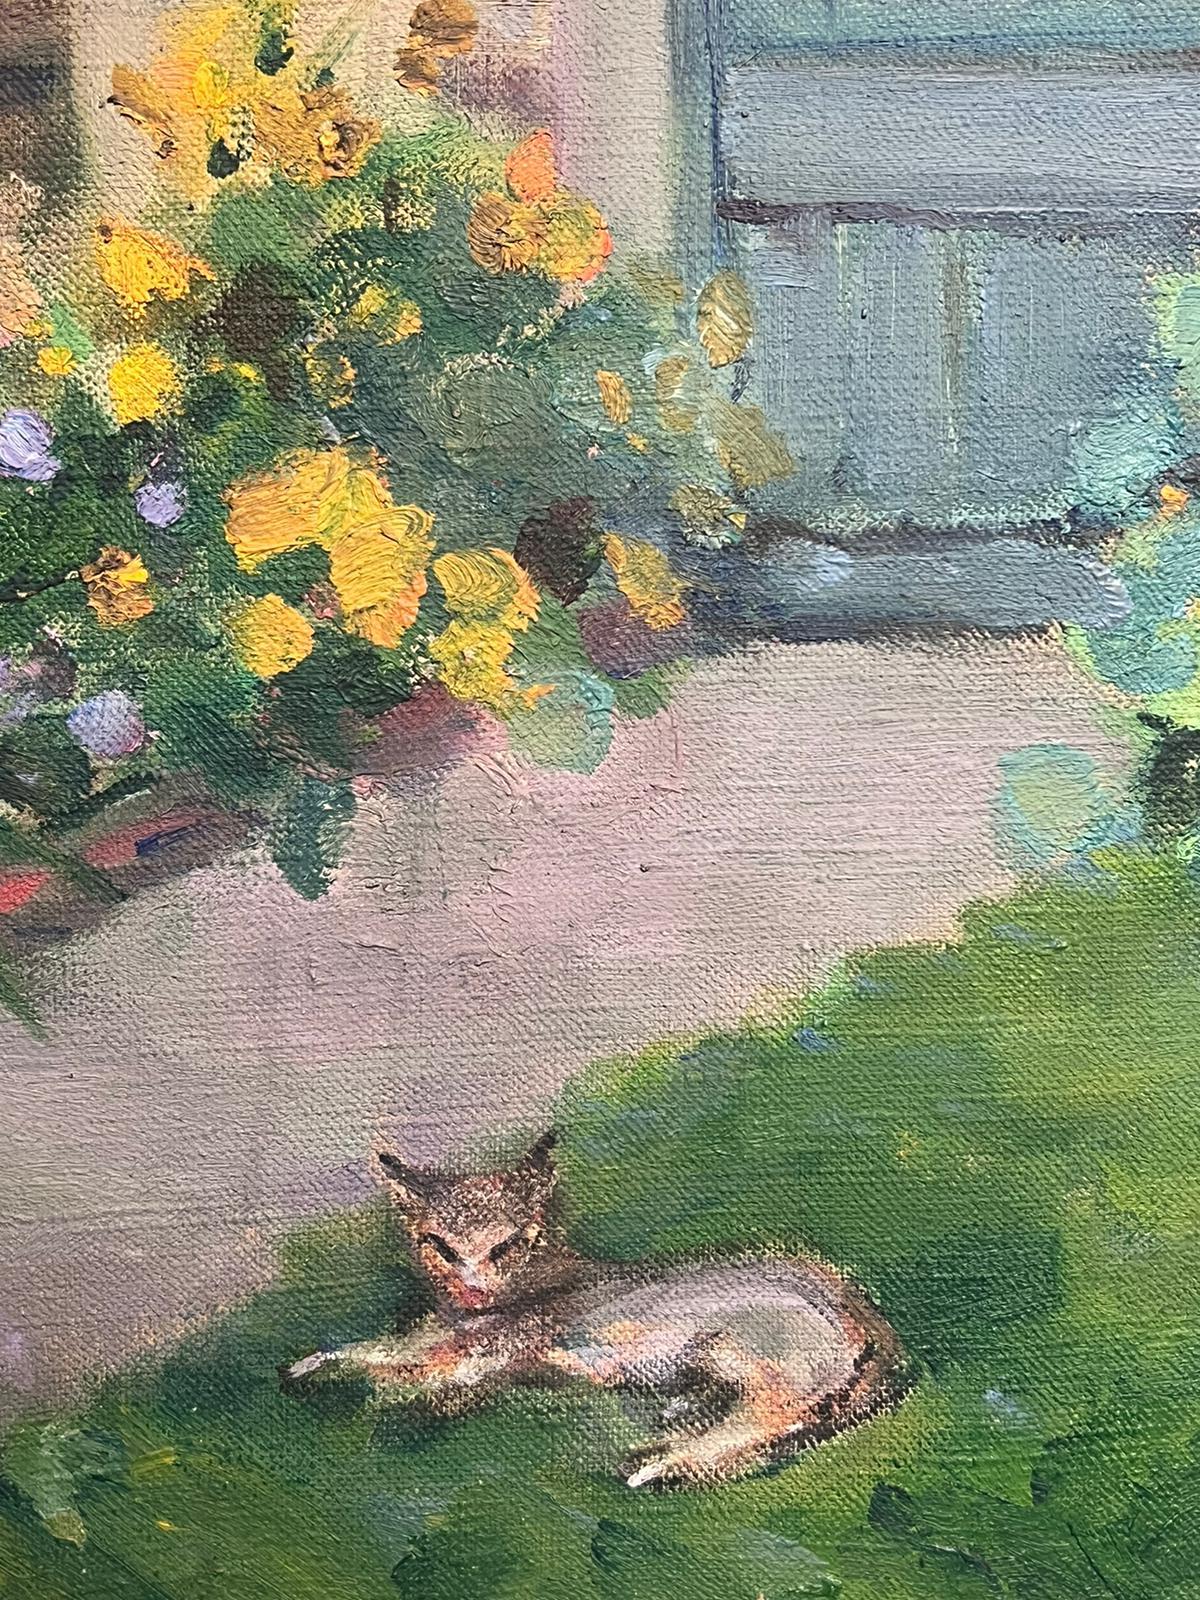 1930's French Impressionist Oil Cottage Flower Garden & Cat on Lawn - Gray Landscape Painting by Louise Alix